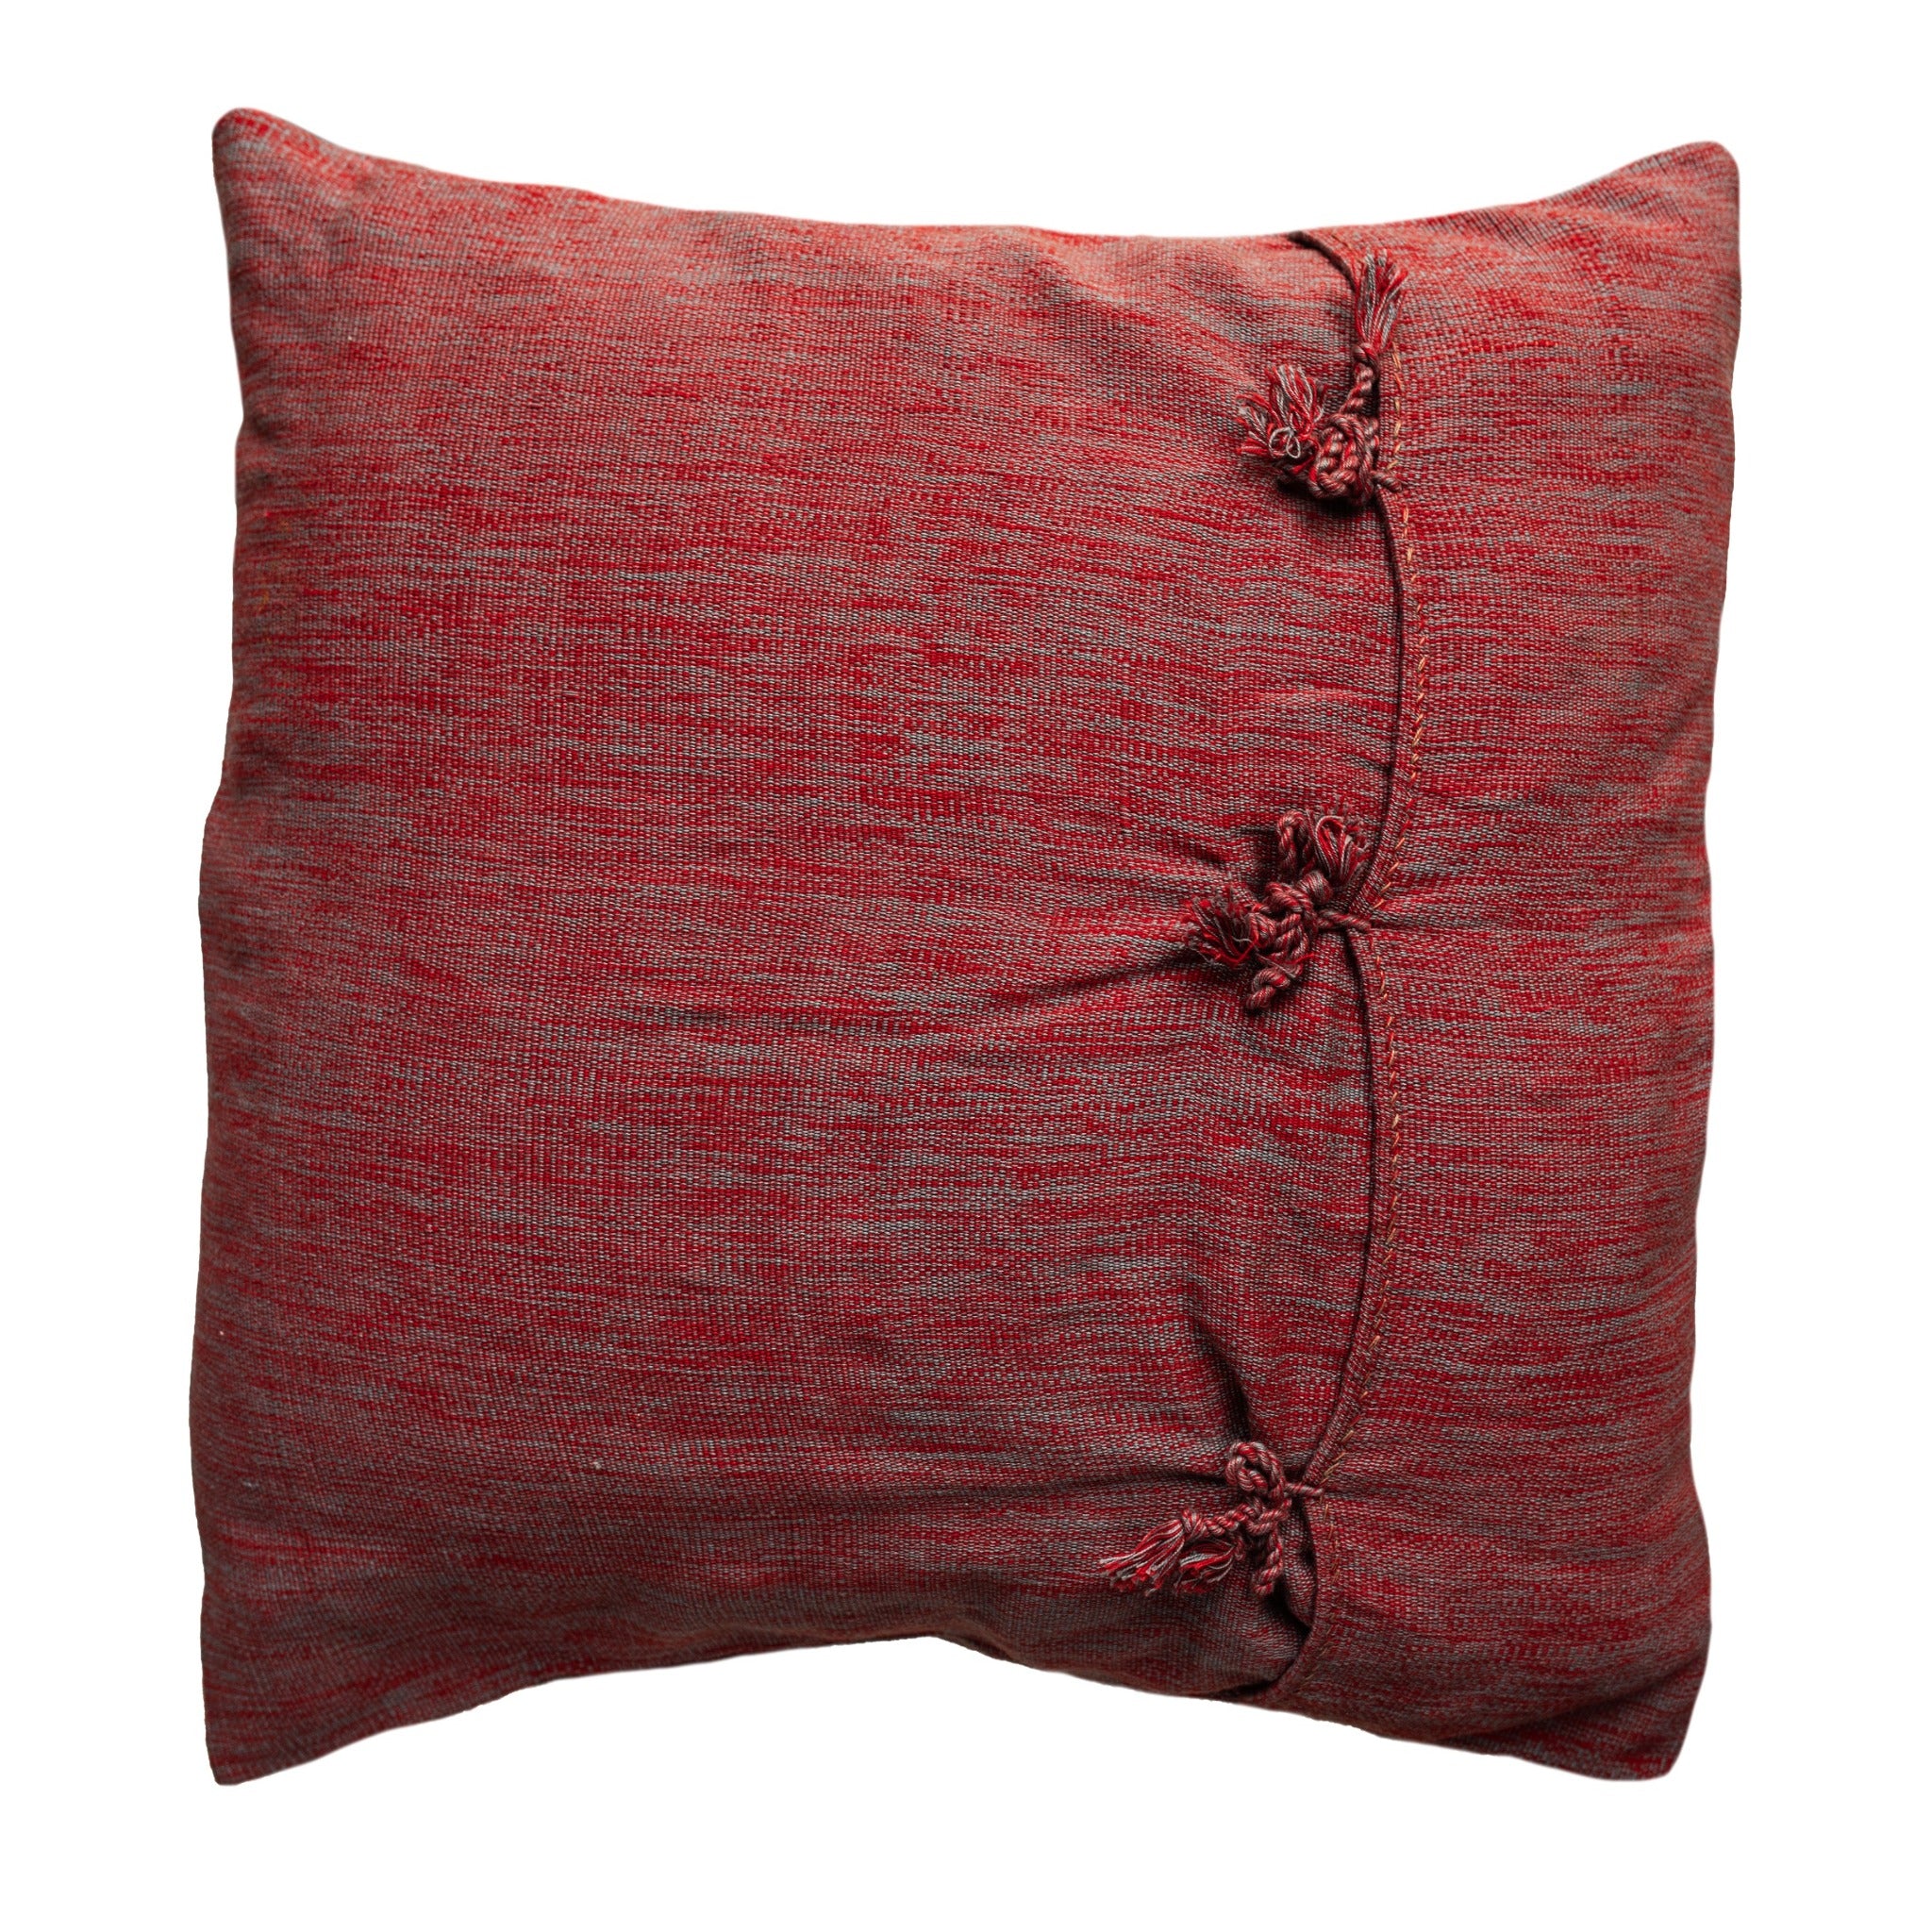 RED WITH GRAY CUSHION COVER